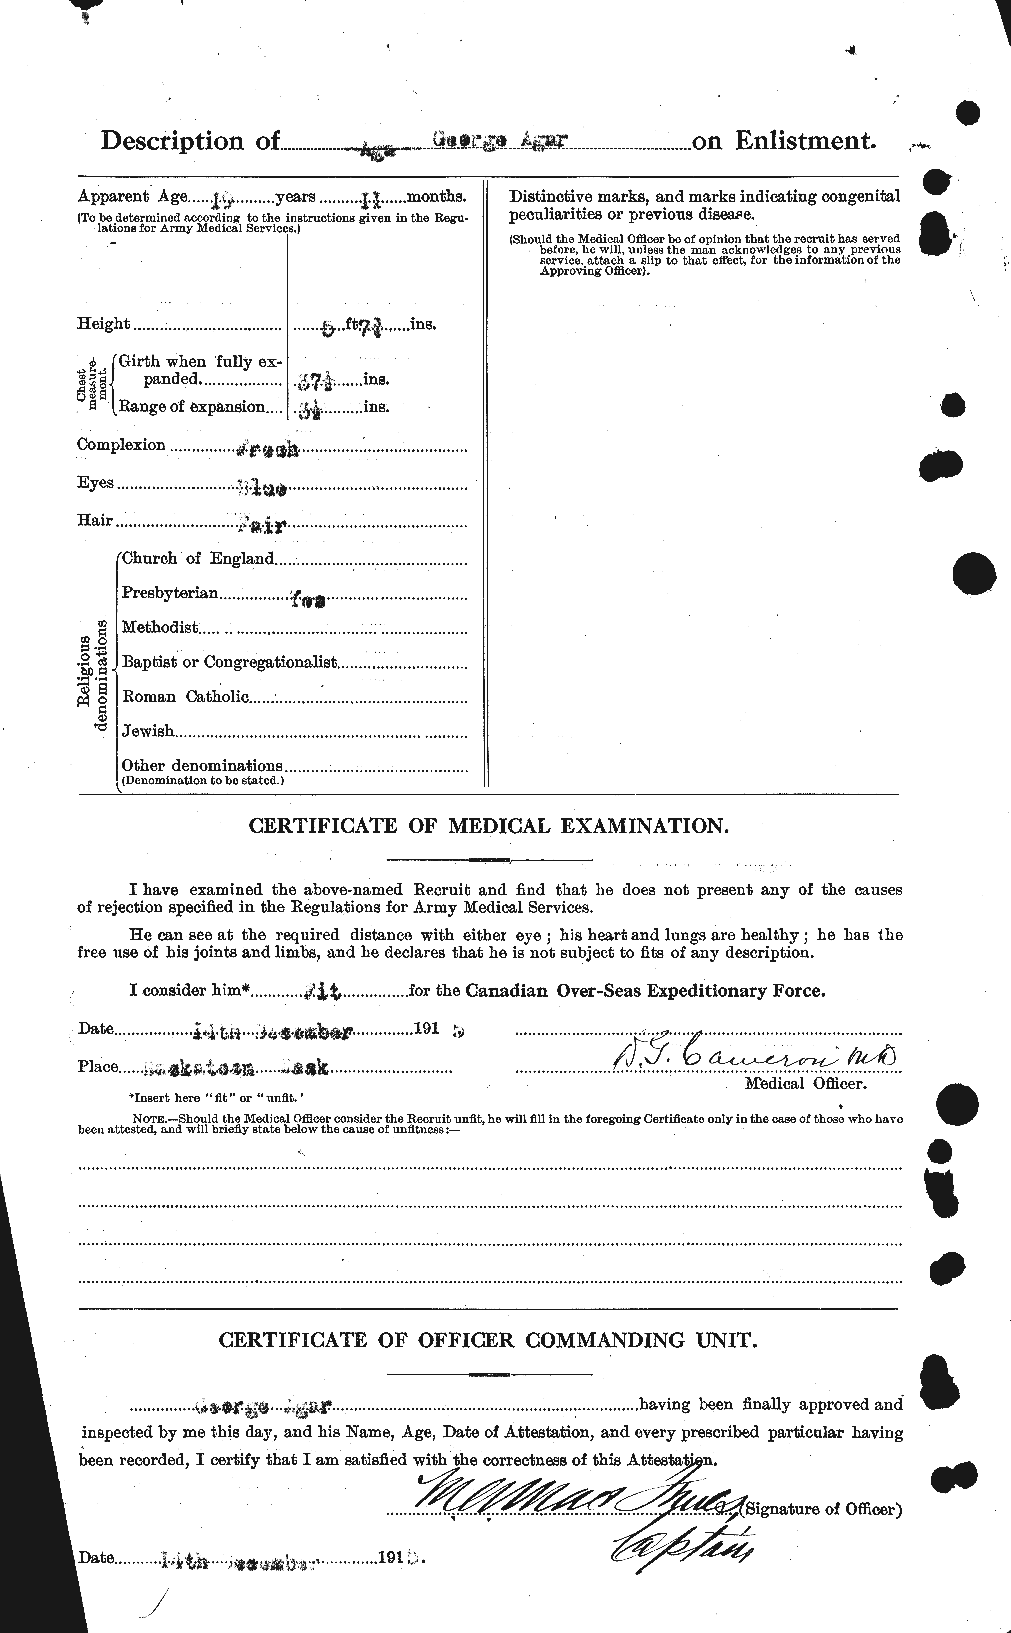 Personnel Records of the First World War - CEF 203667b